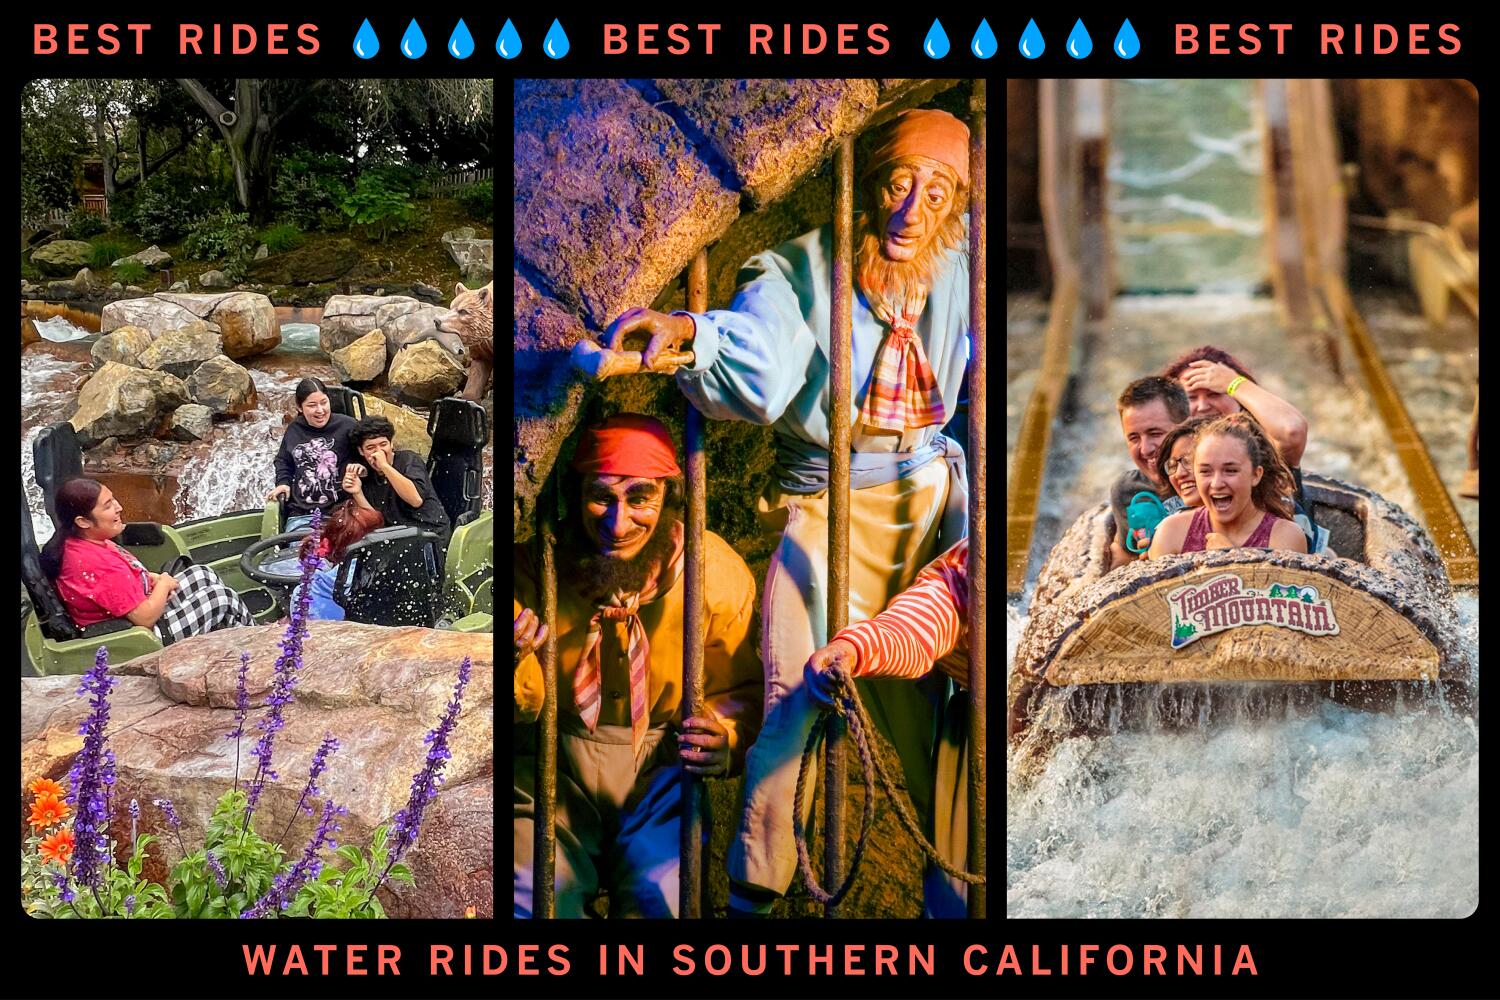 The best water rides in Southern California, ranked by splash factor